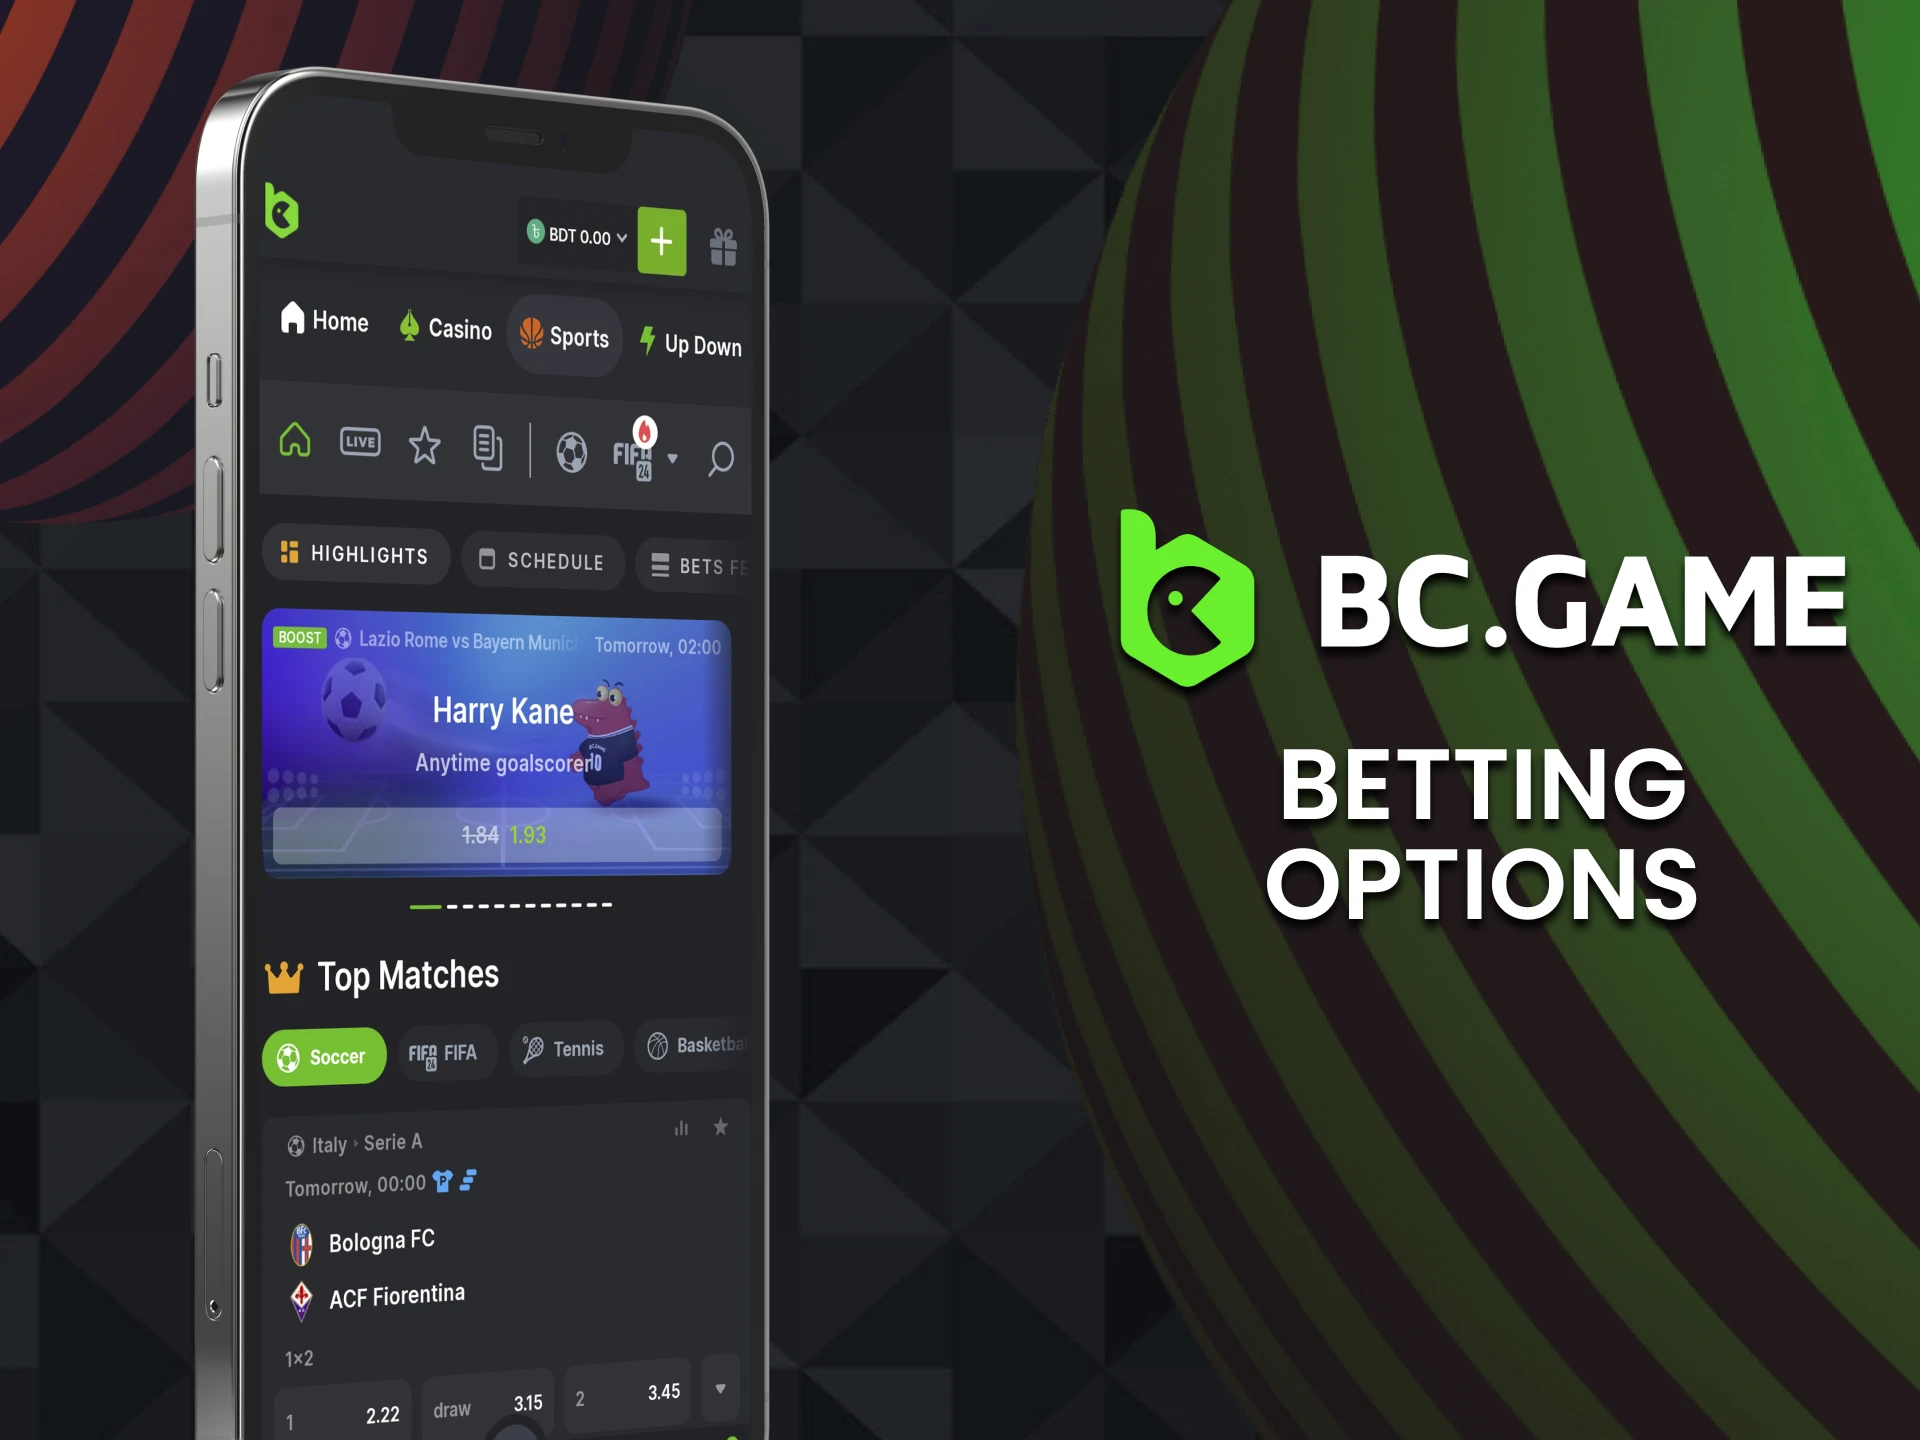 There are 3 betting options in the BC Game app.